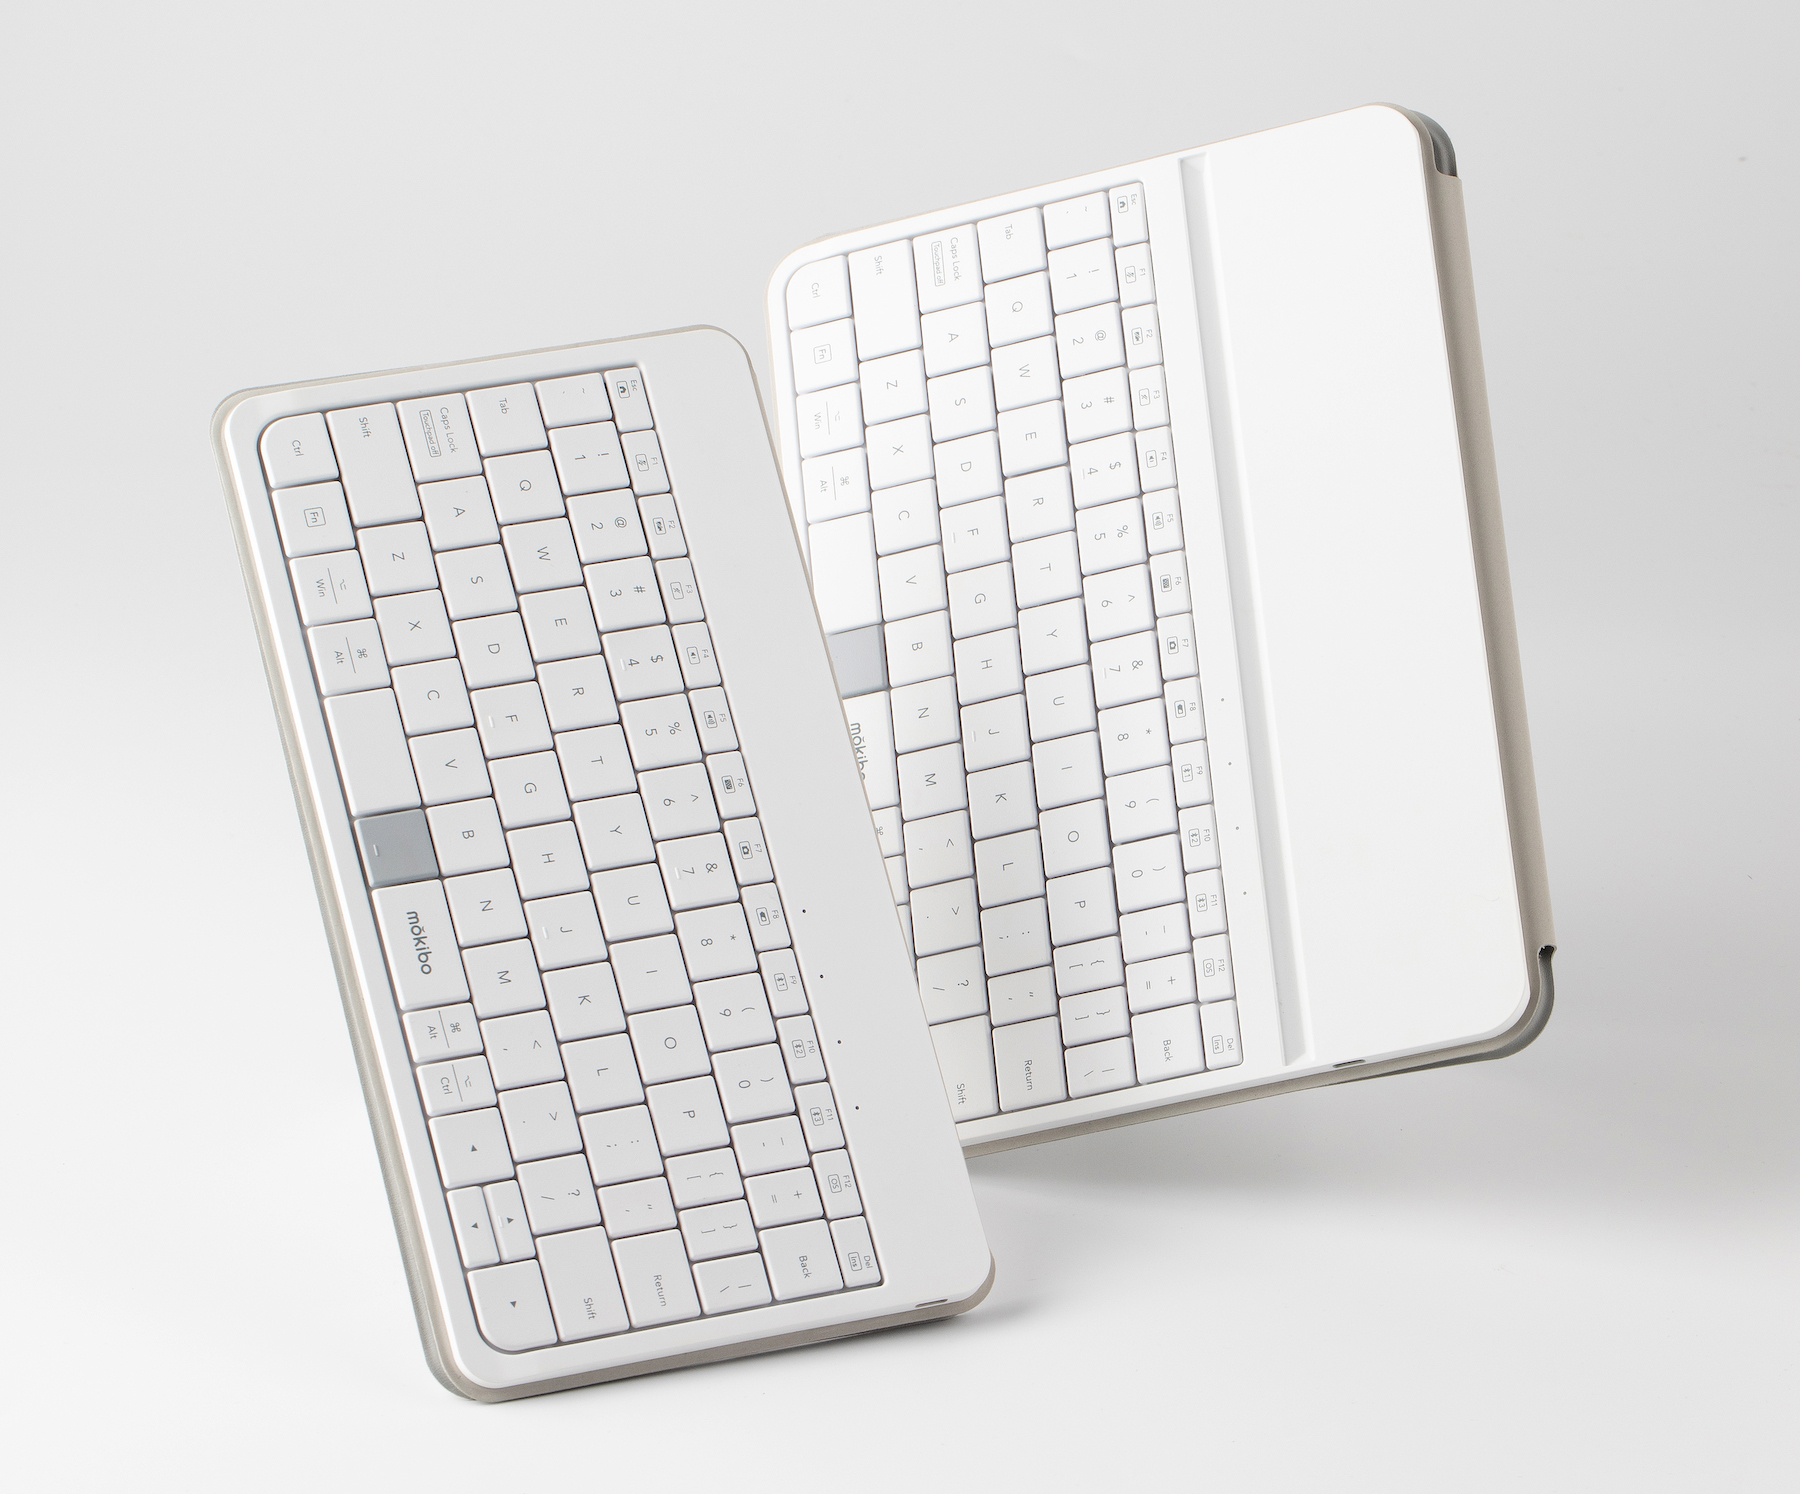 New Fusion Keyboard 2.0 for iPad hides an invisible trackpad underneath